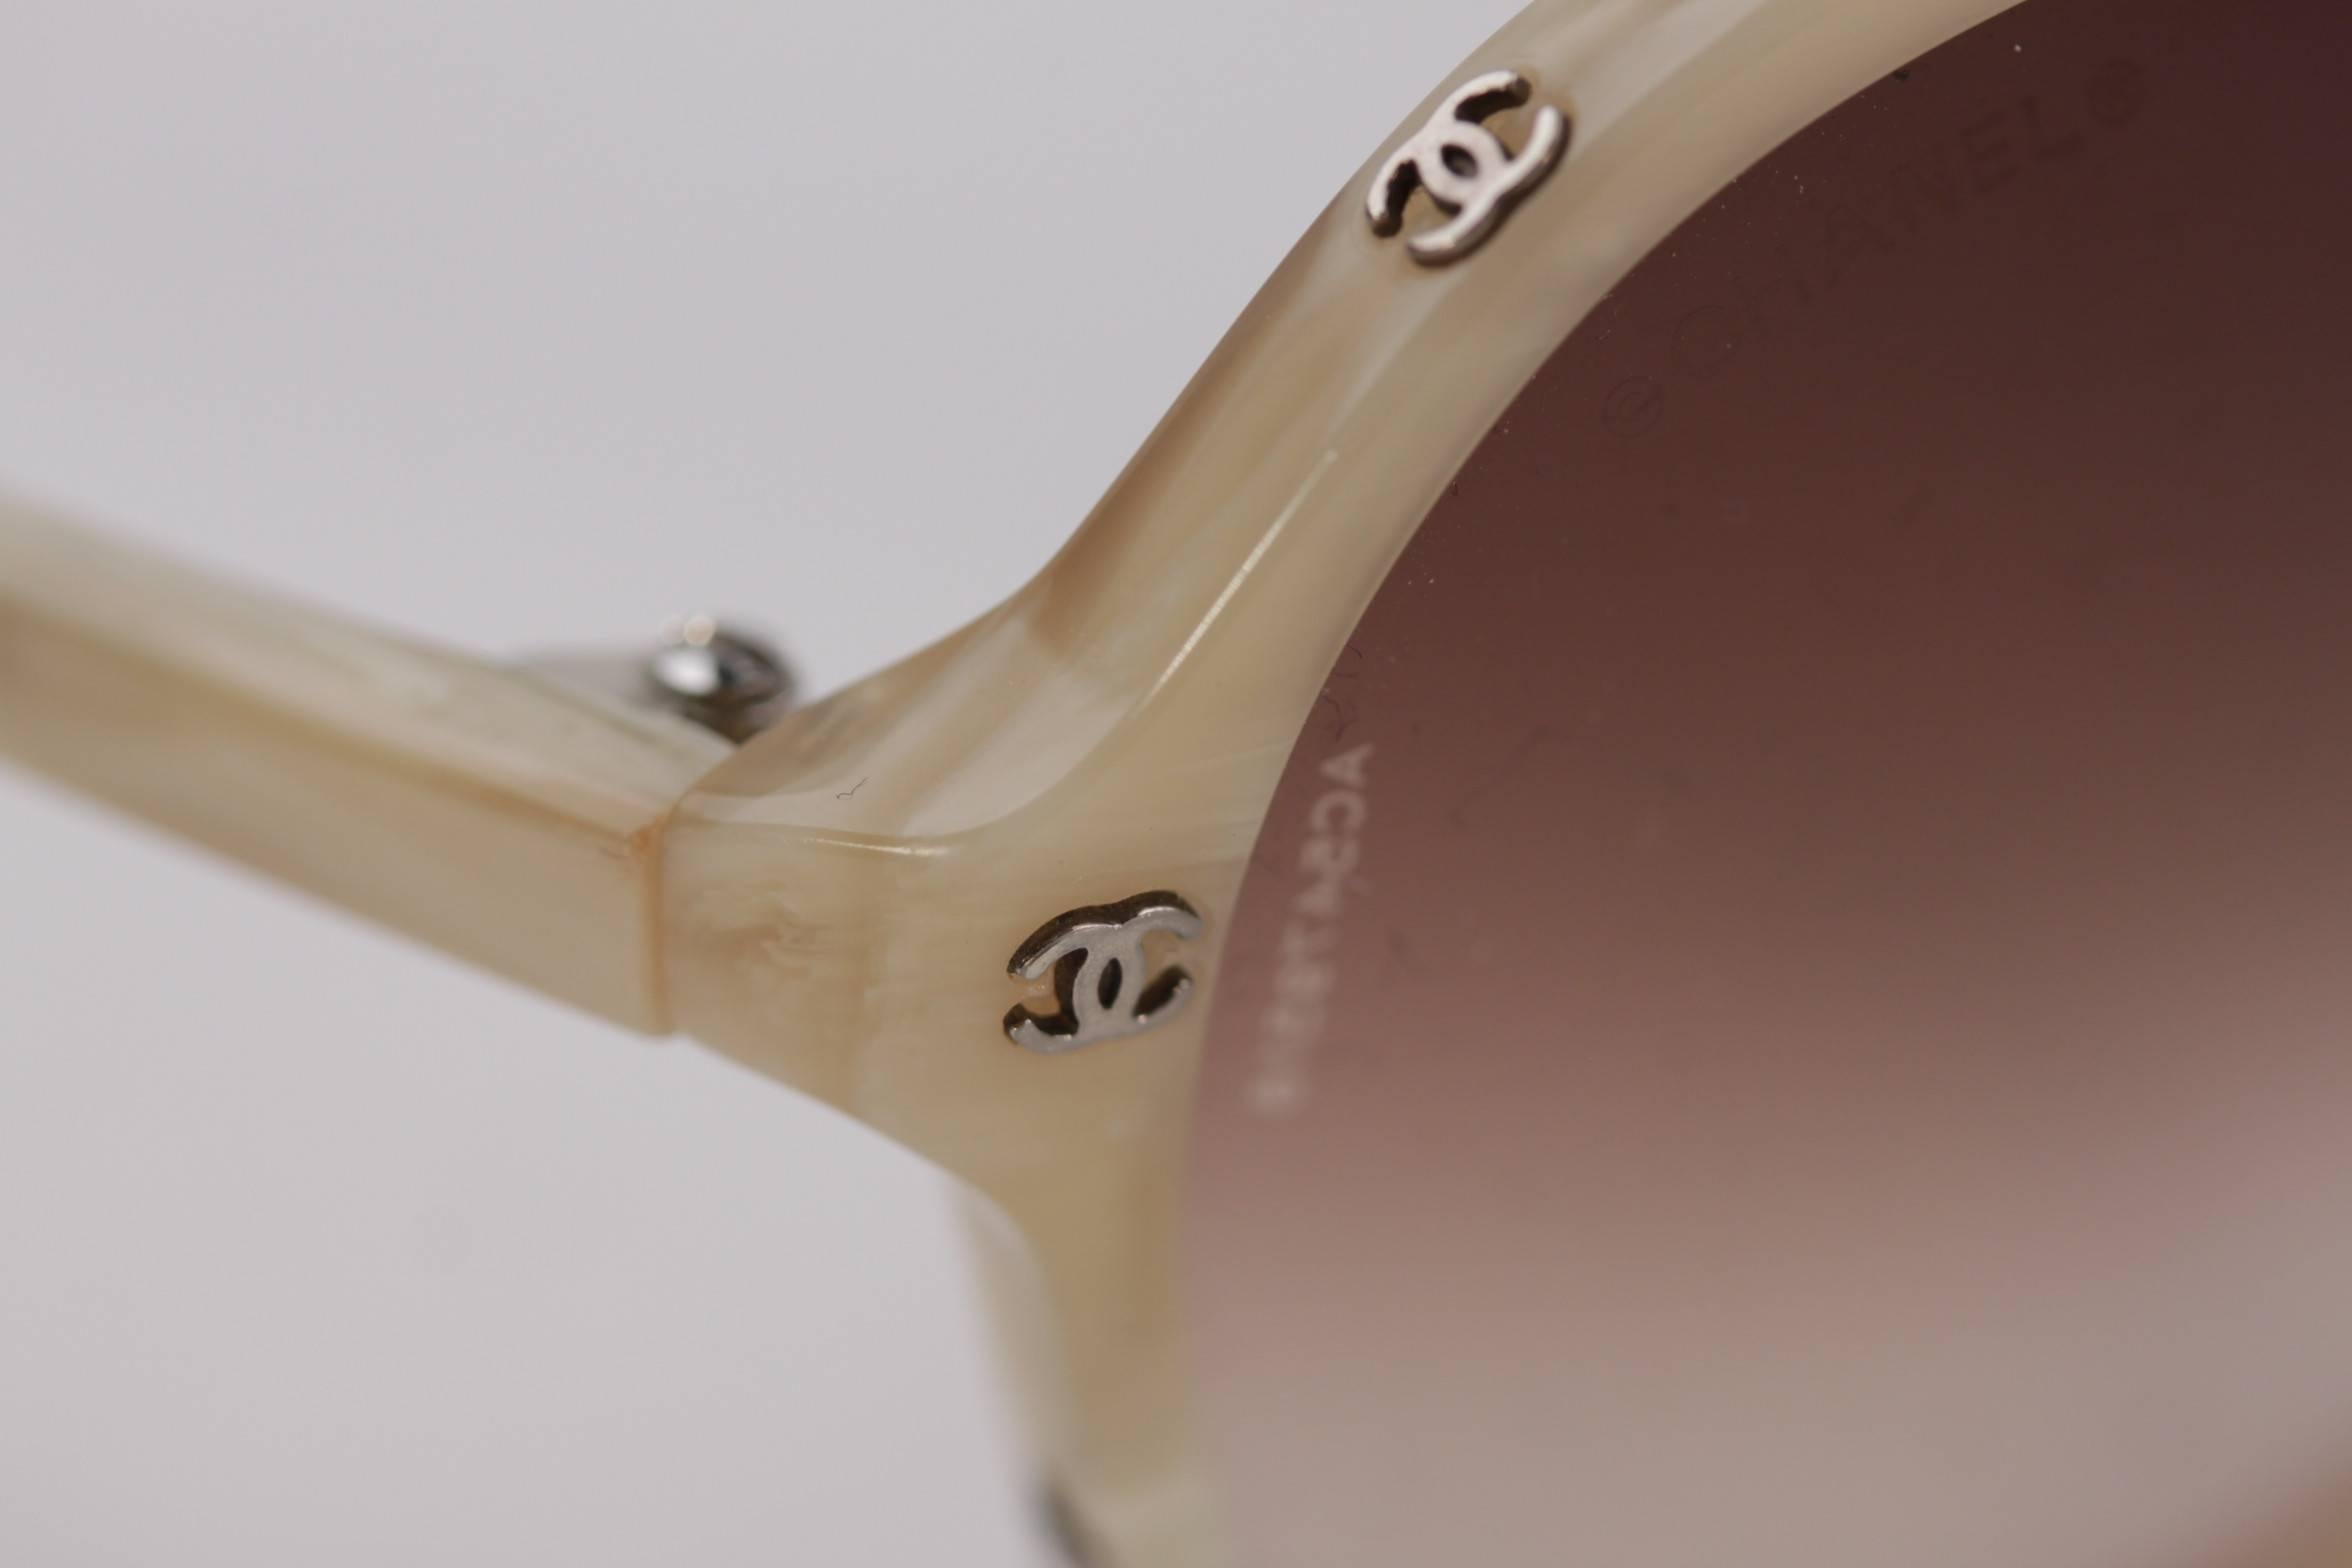 CHANEL Ivory SUNGLASSES 5117 c.953/13 60/16 130 Shades CC LOGOS w/ CASE AS In Excellent Condition In Rome, Rome